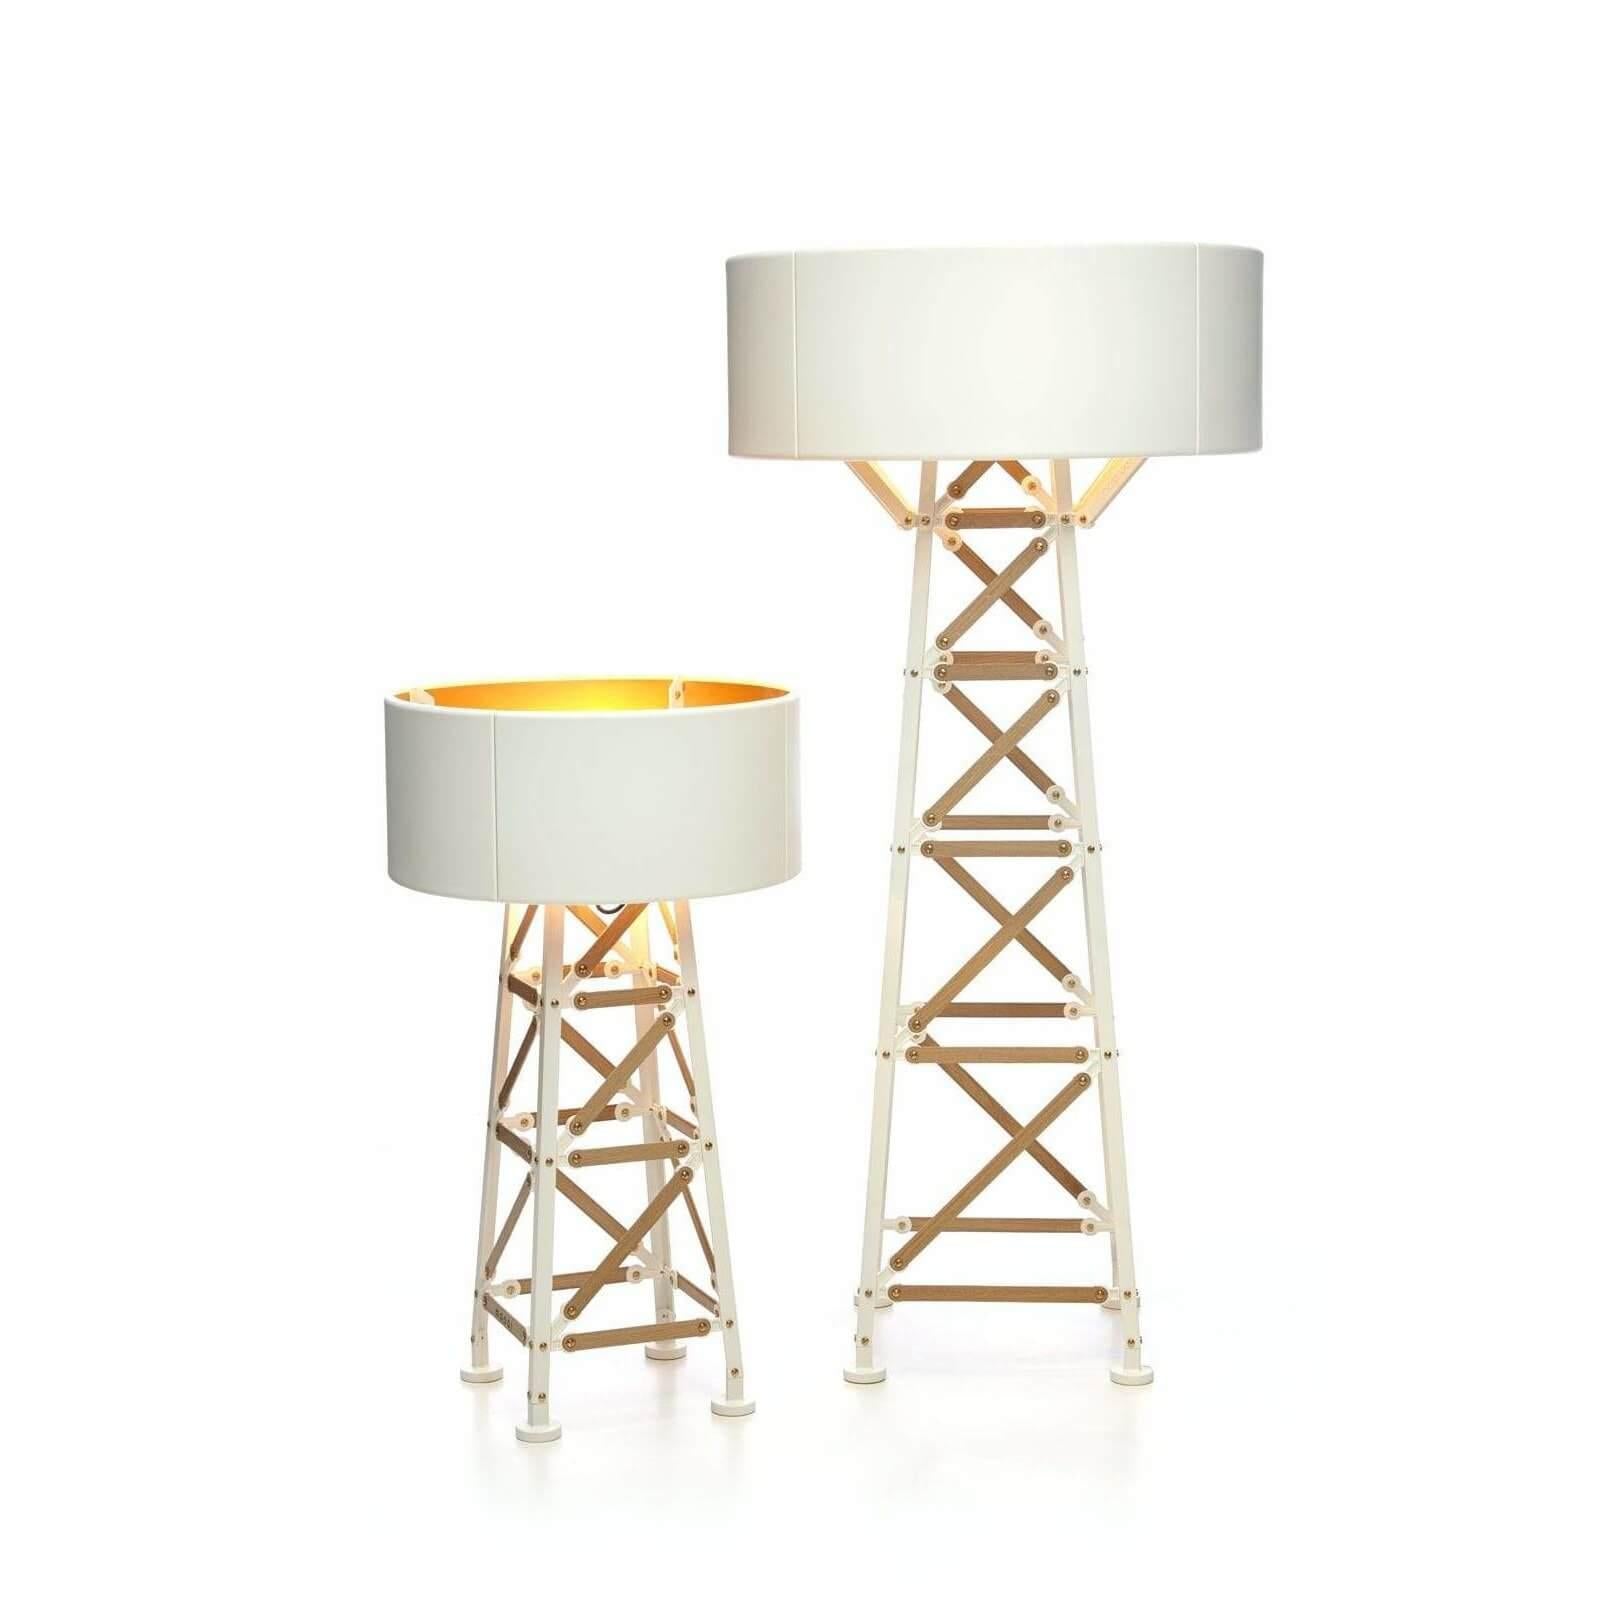 Construction Lamp Floor - Curated - Lighting - Moooi